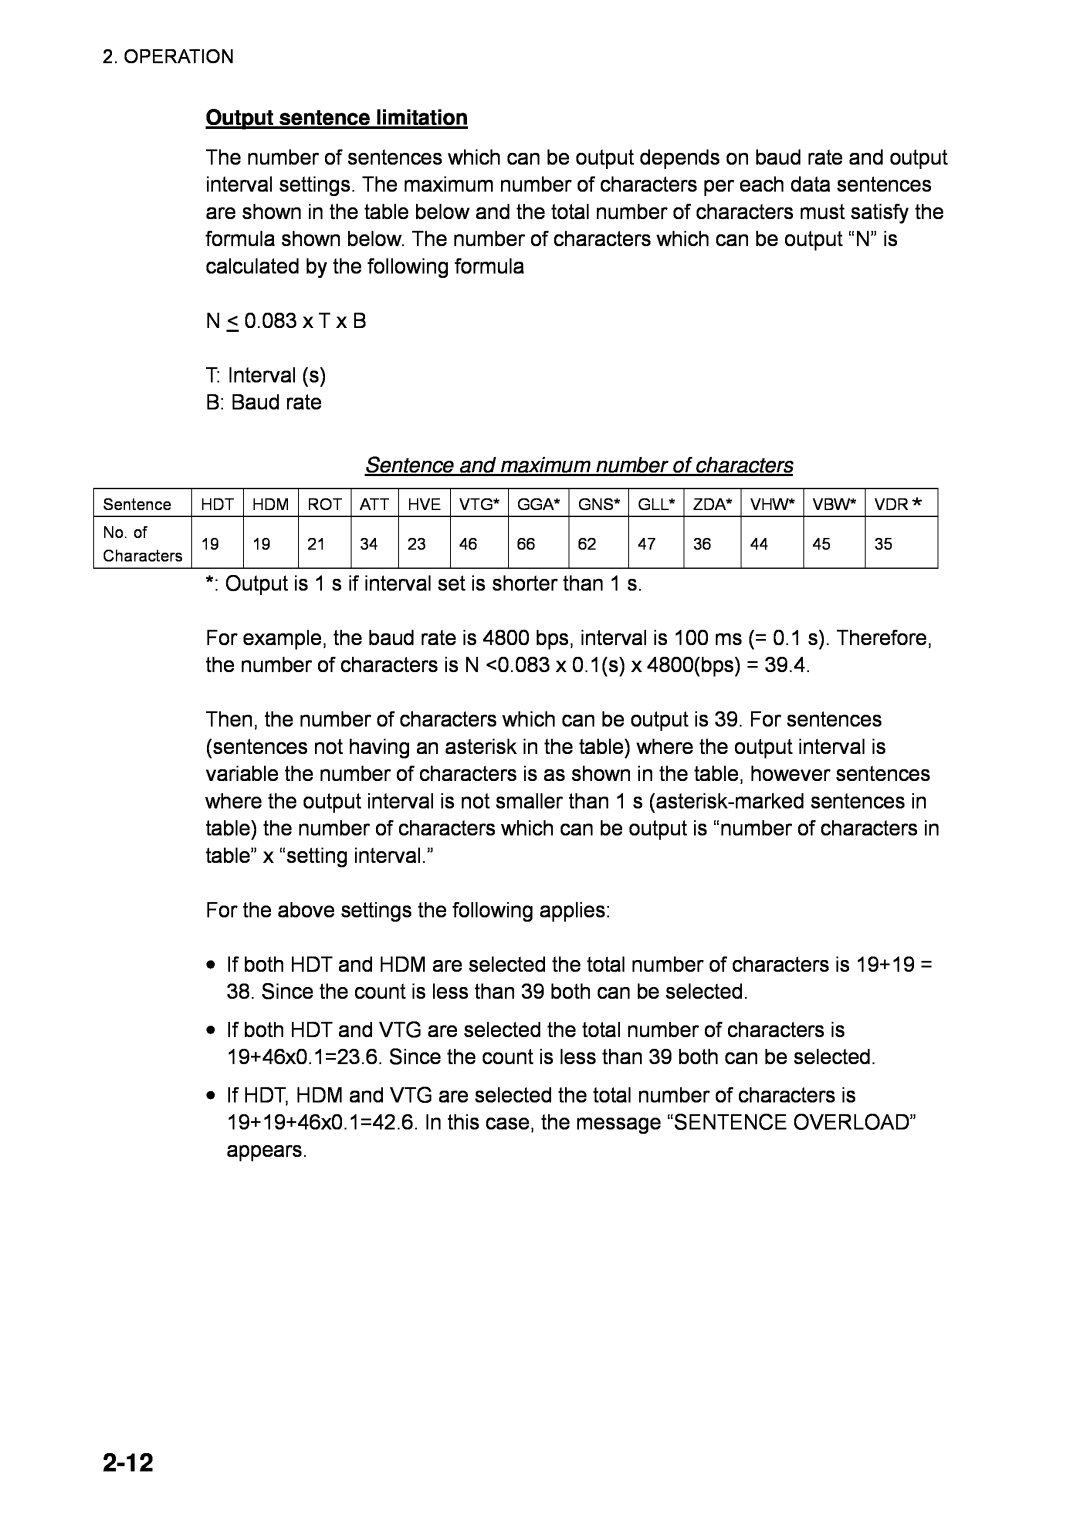 Furuno SC-110 manual 2-12, Output sentence limitation, Sentence and maximum number of characters 